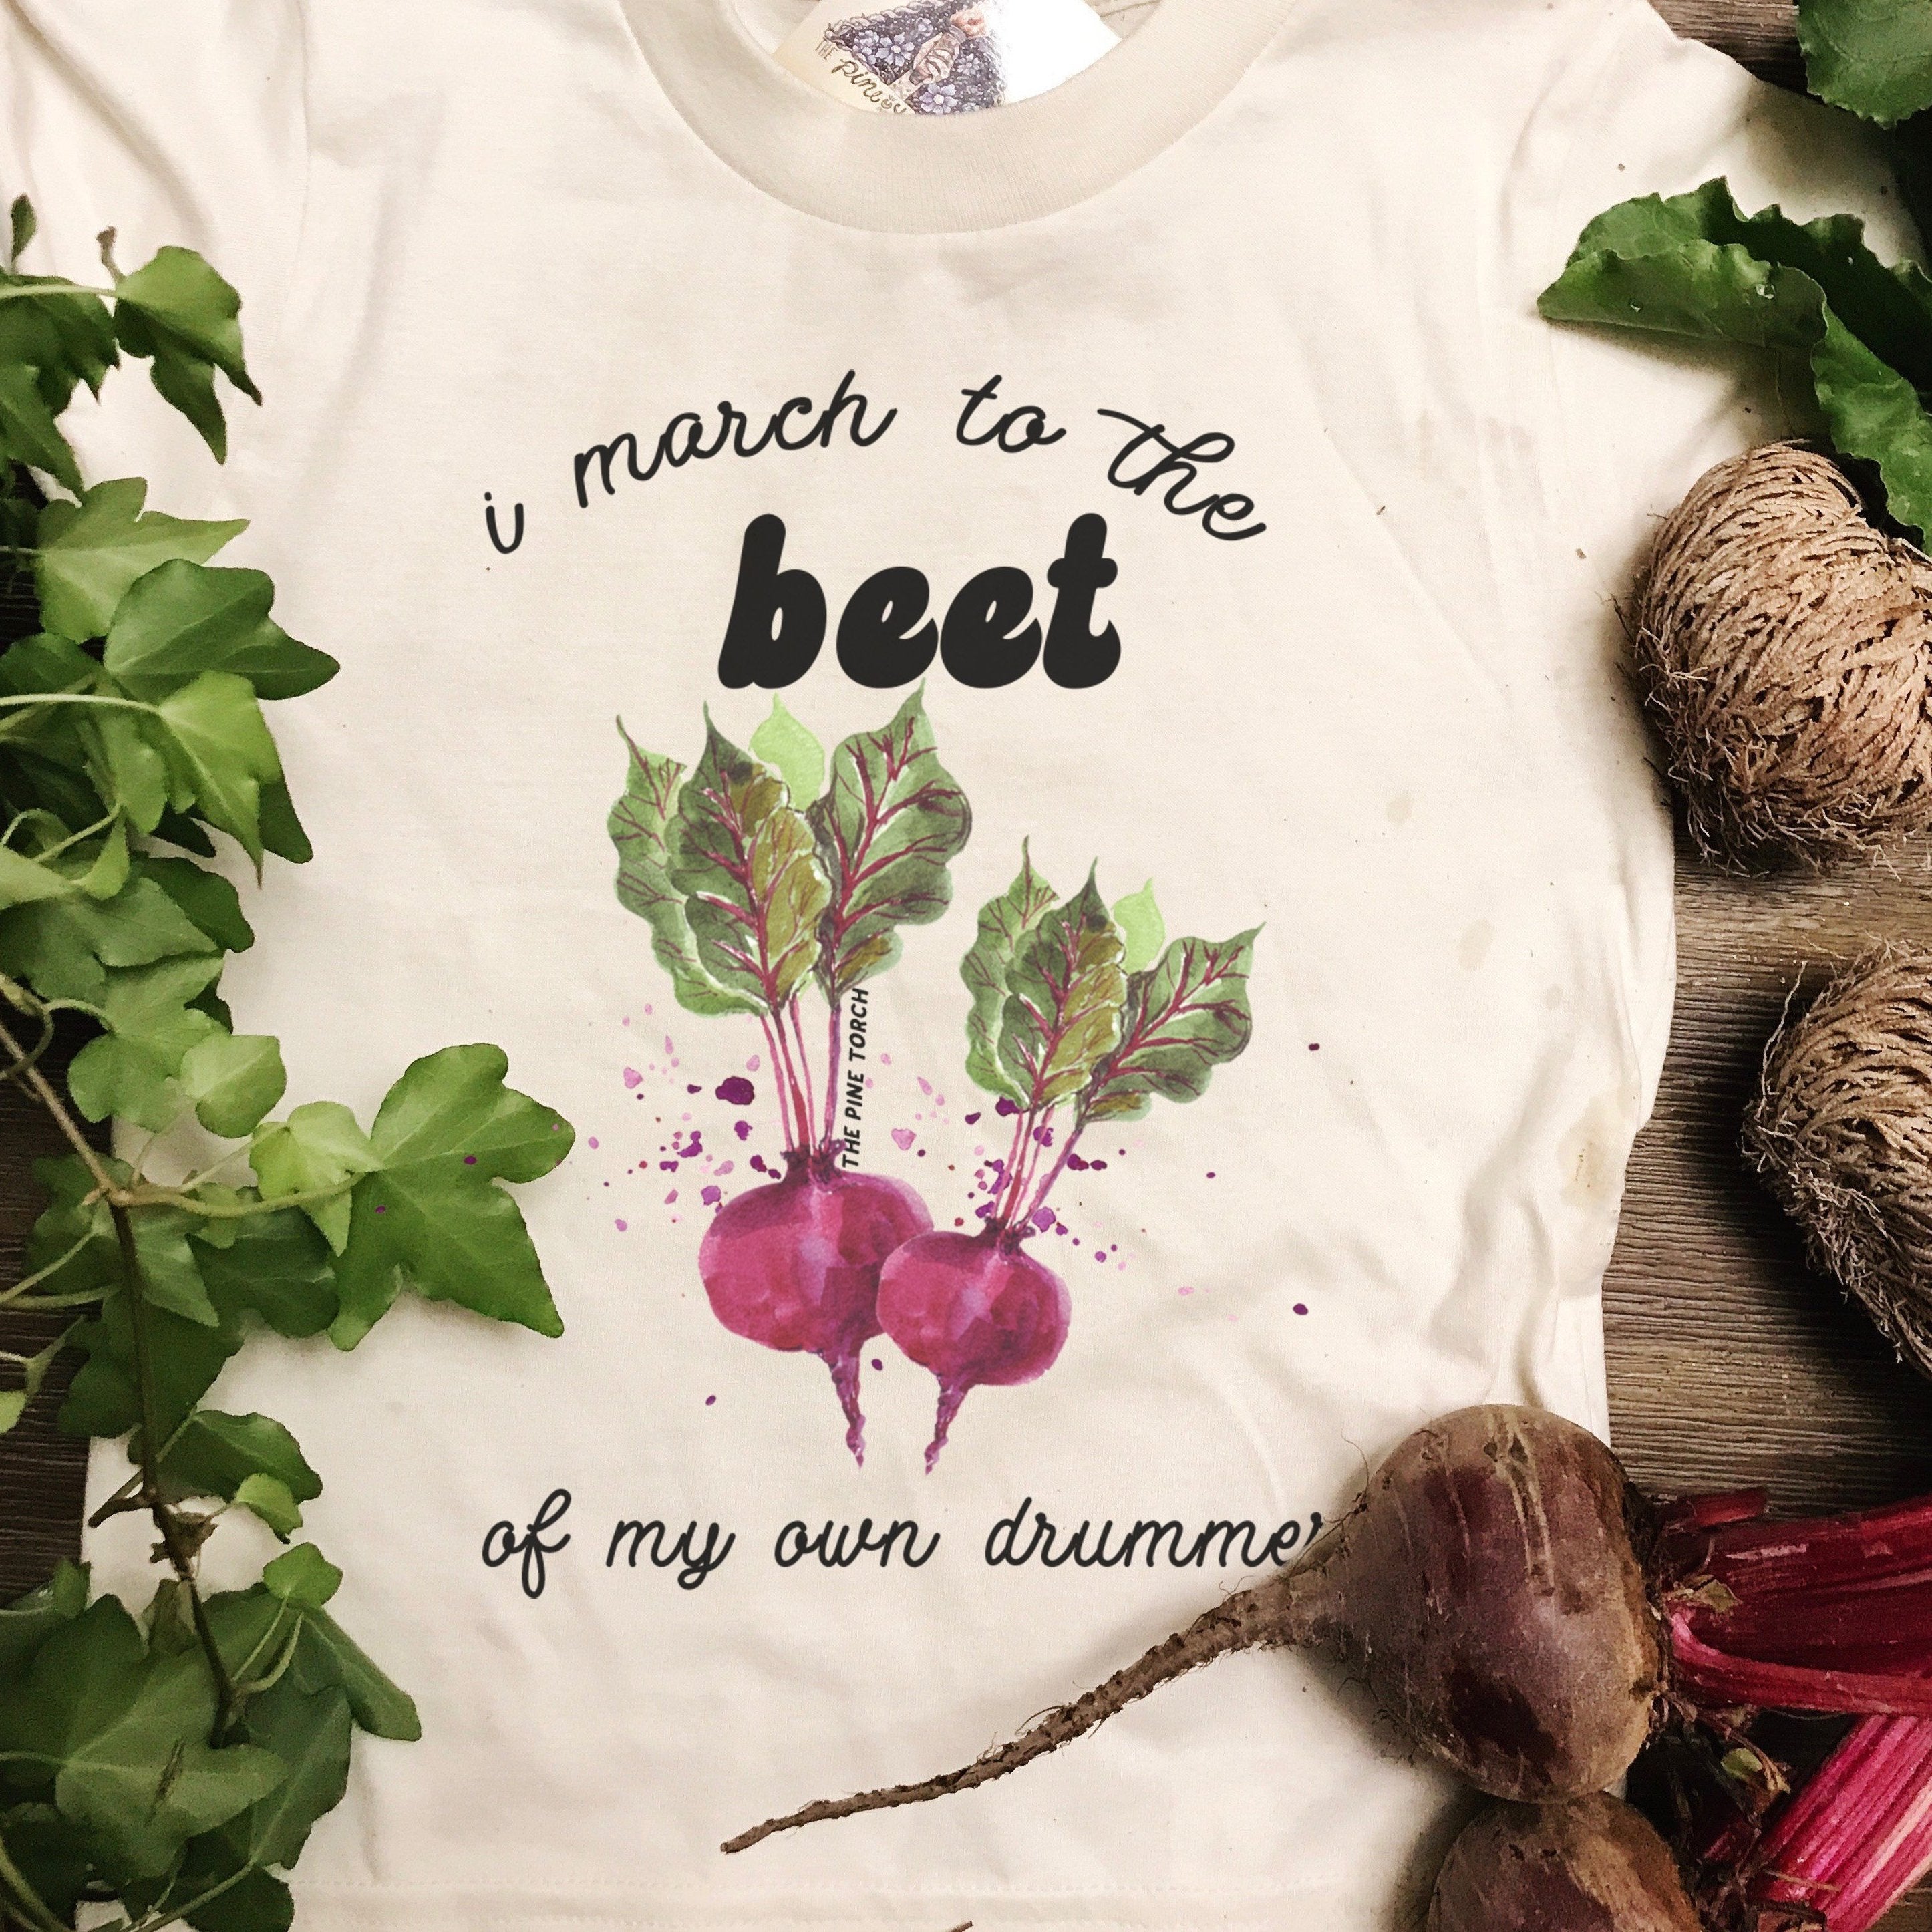 « I MARCH TO THE BEET OF MY OWN DRUMMER » KID'S TEE